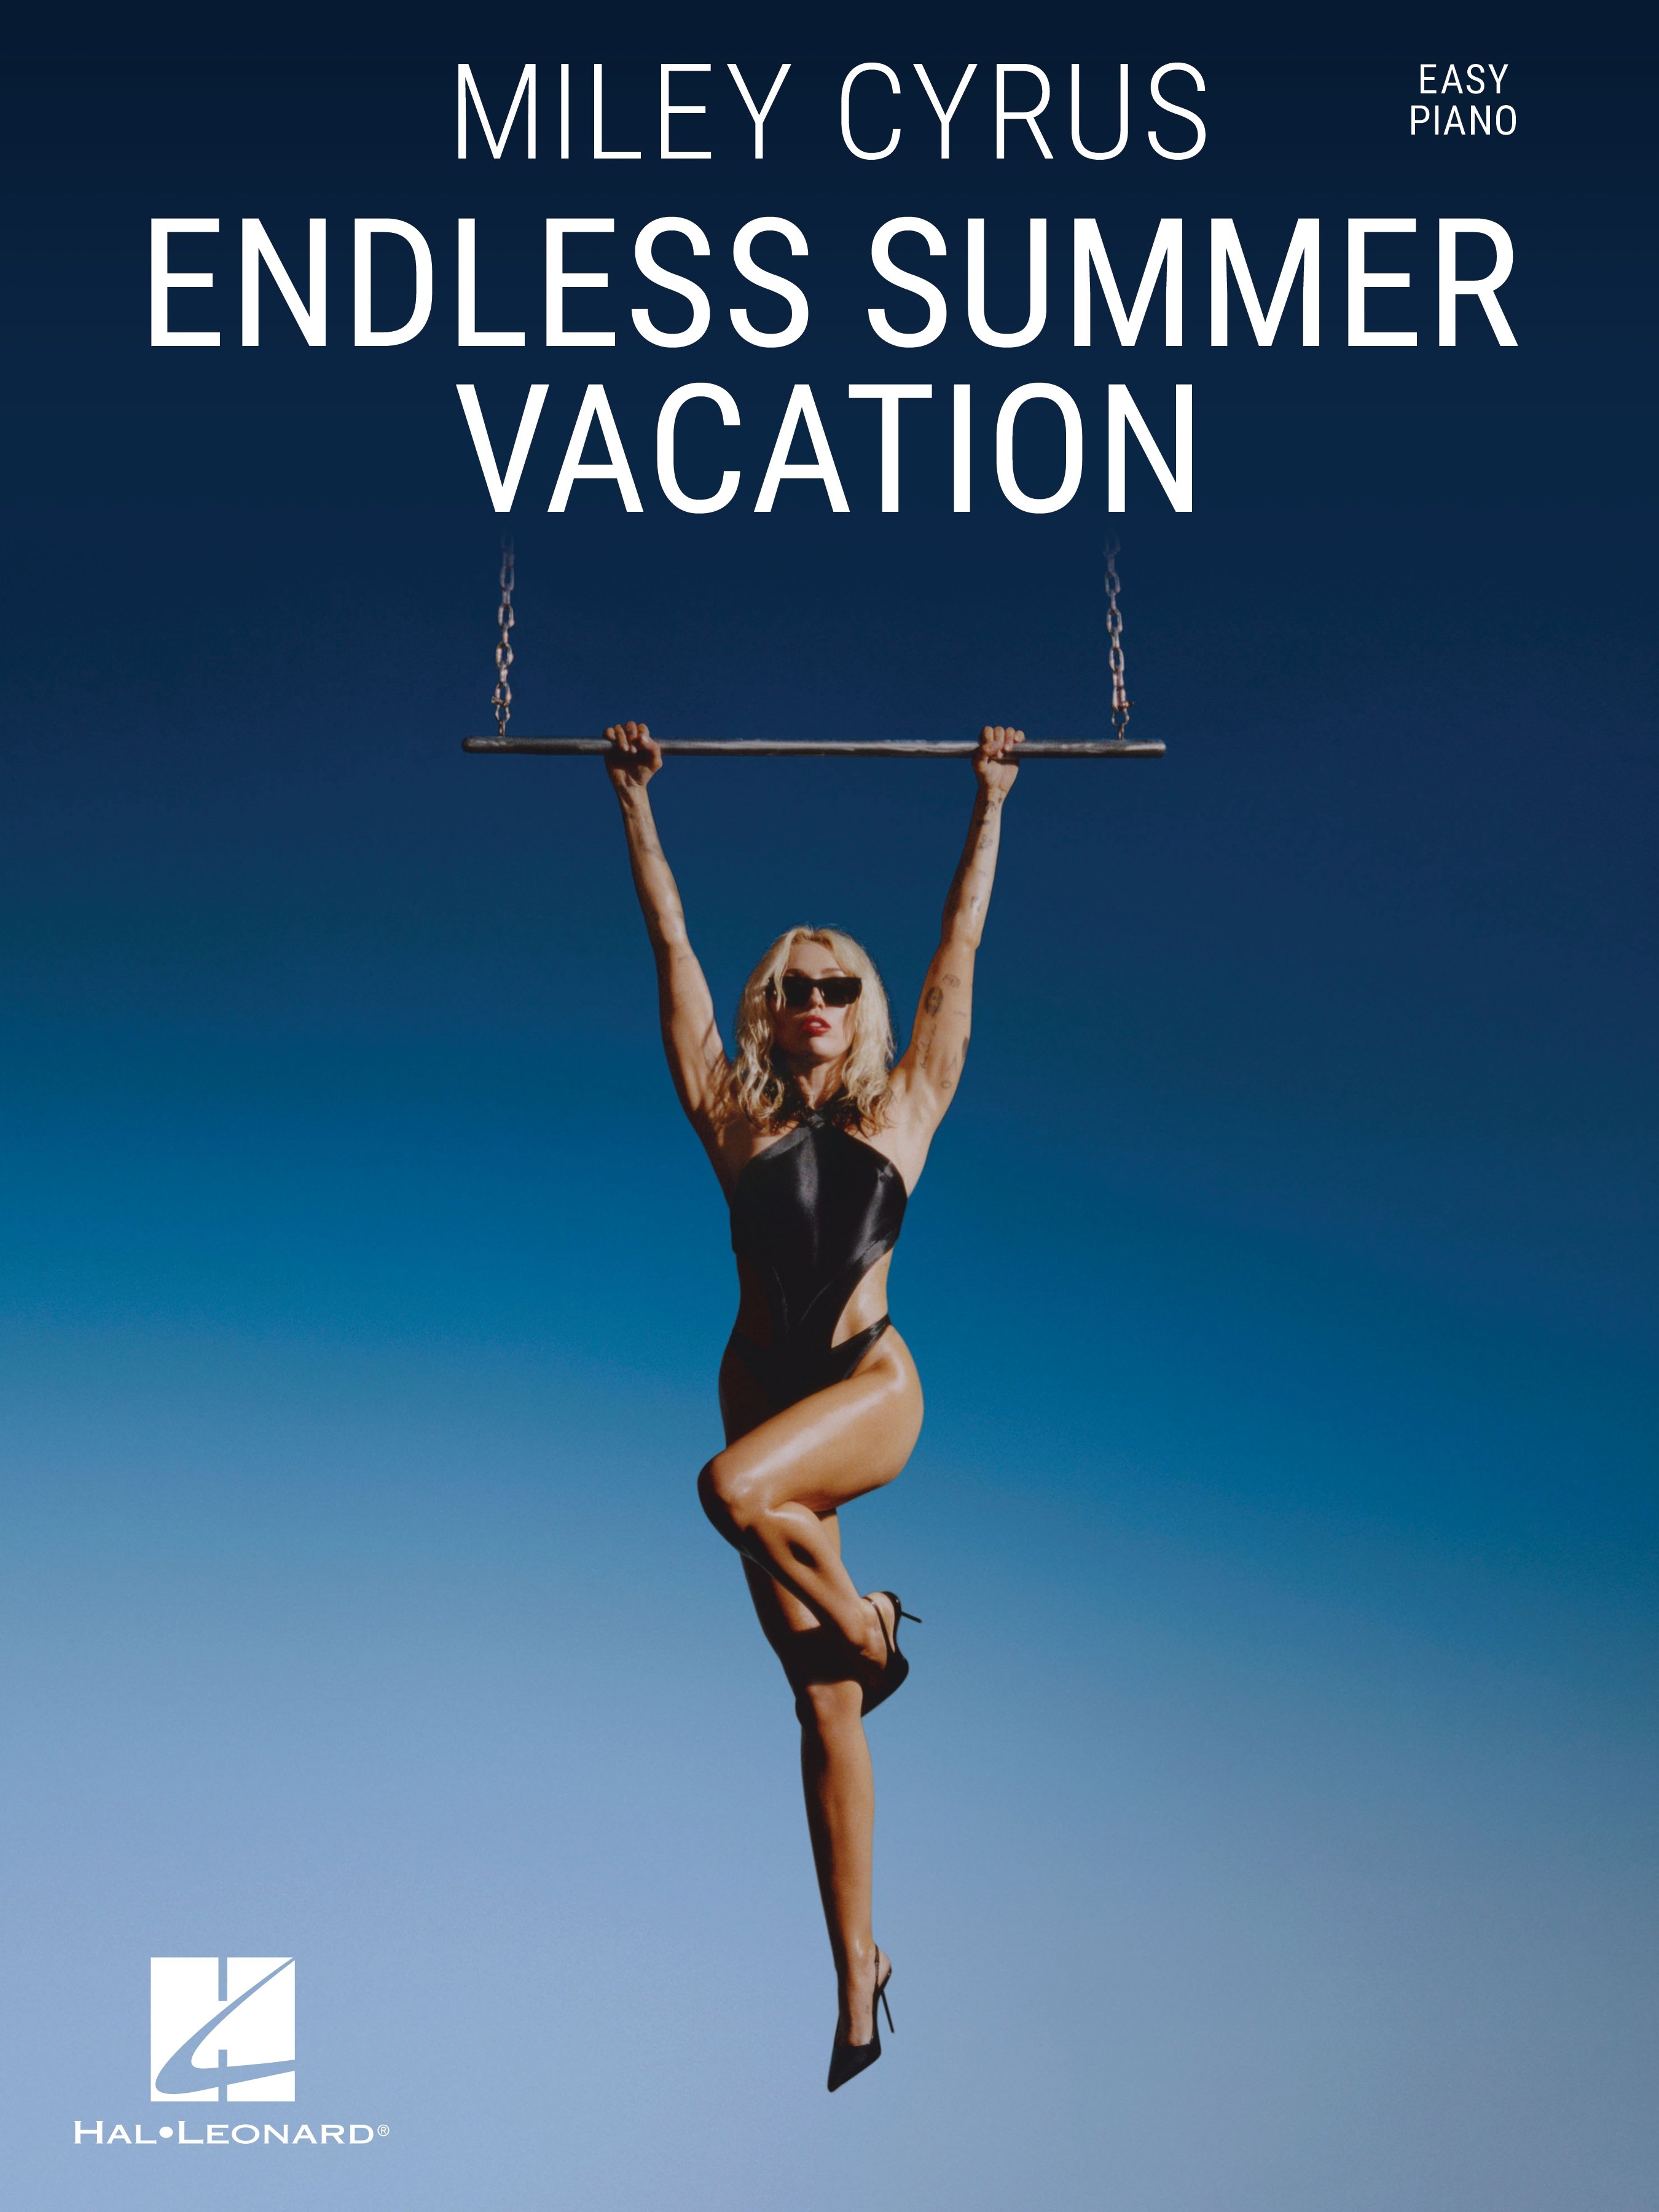 Endless Summer Vacation vocal sheet music cover